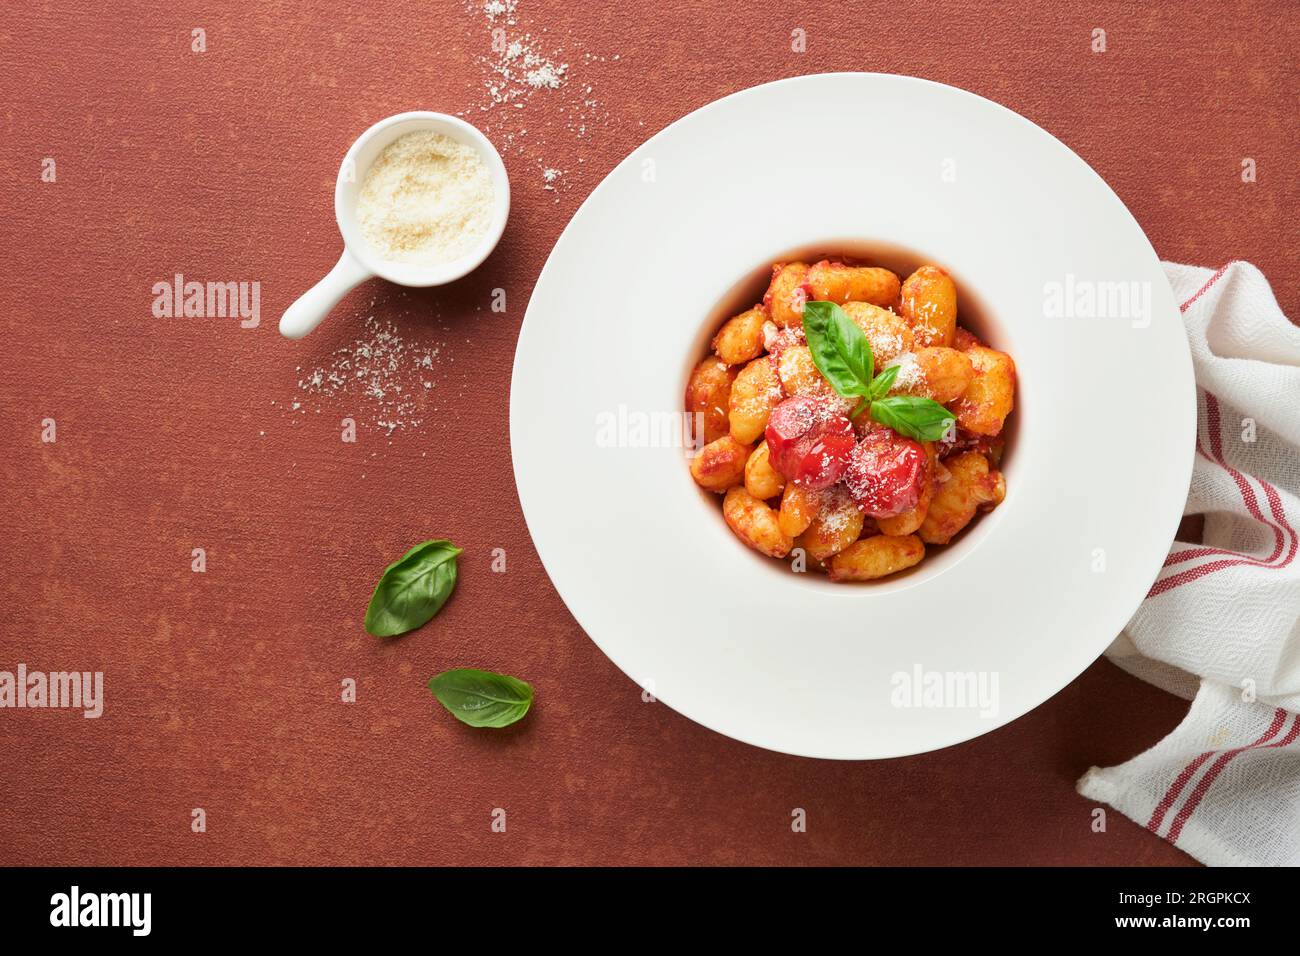 Potato gnocchi. Traditional homemade potato gnocchi with tomato sauce, basil and parmesan cheese on kitchen table on red kitchen table background. Tra Stock Photo